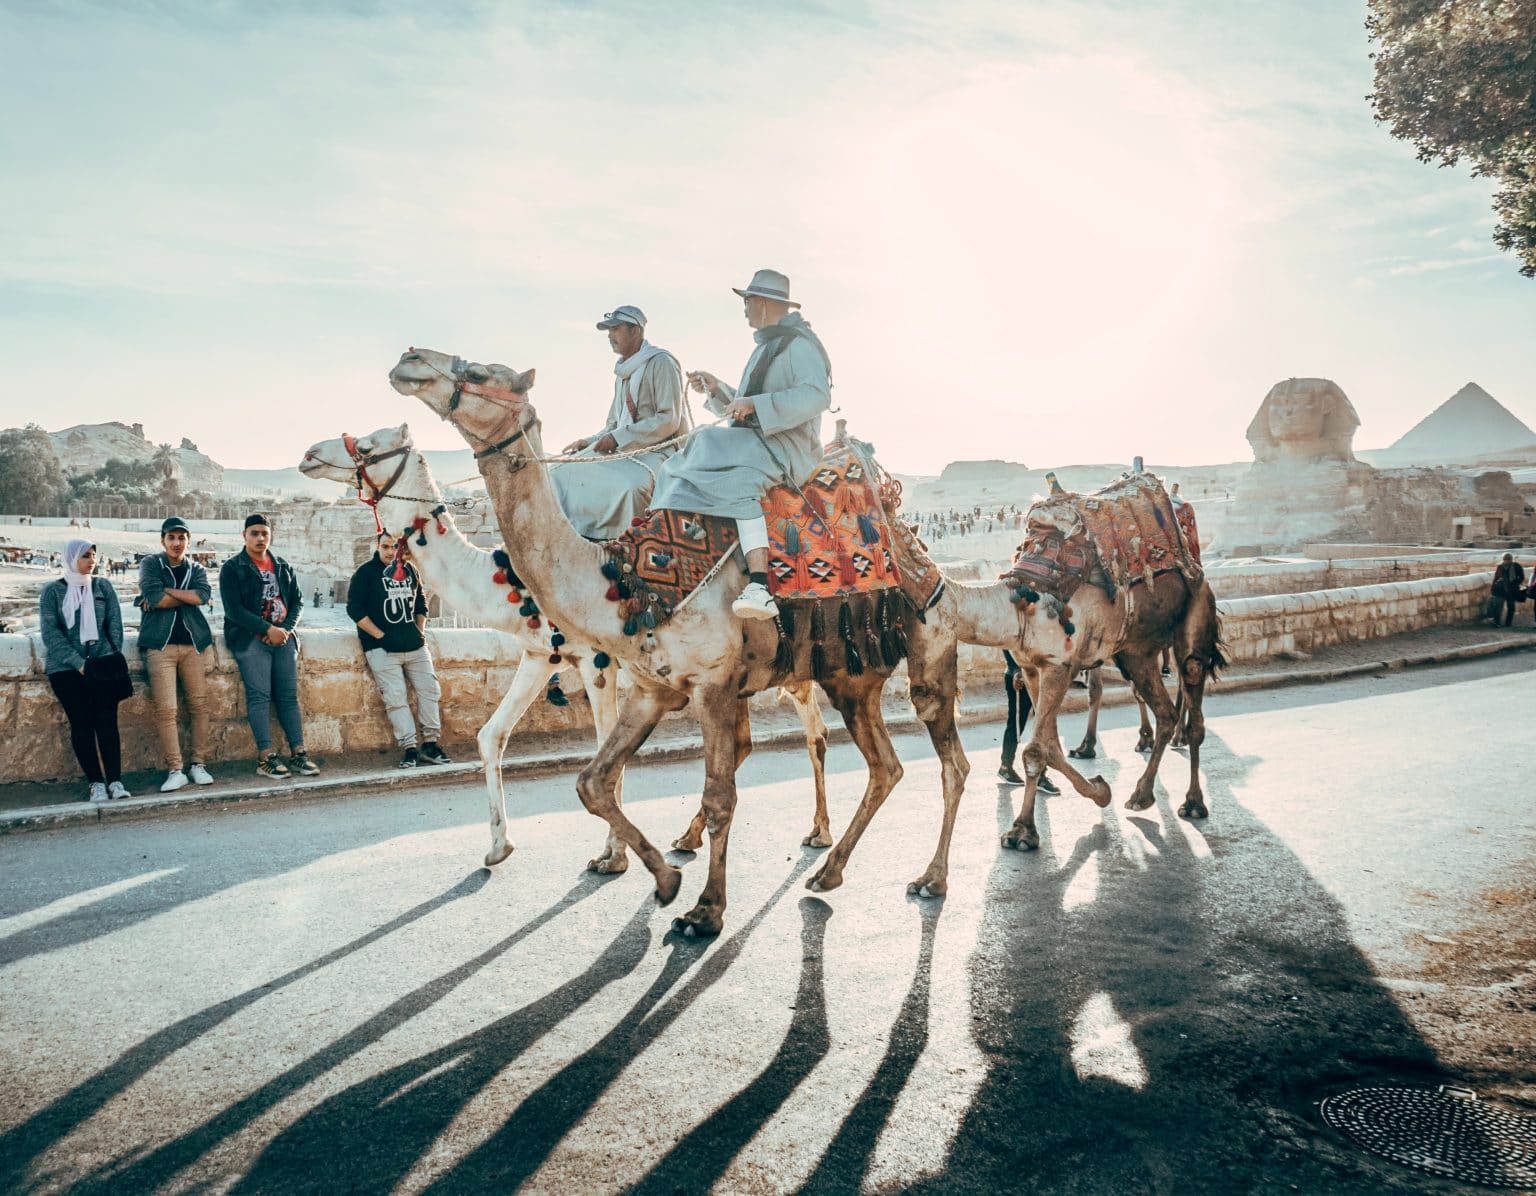 What you need to know to travel to Egypt